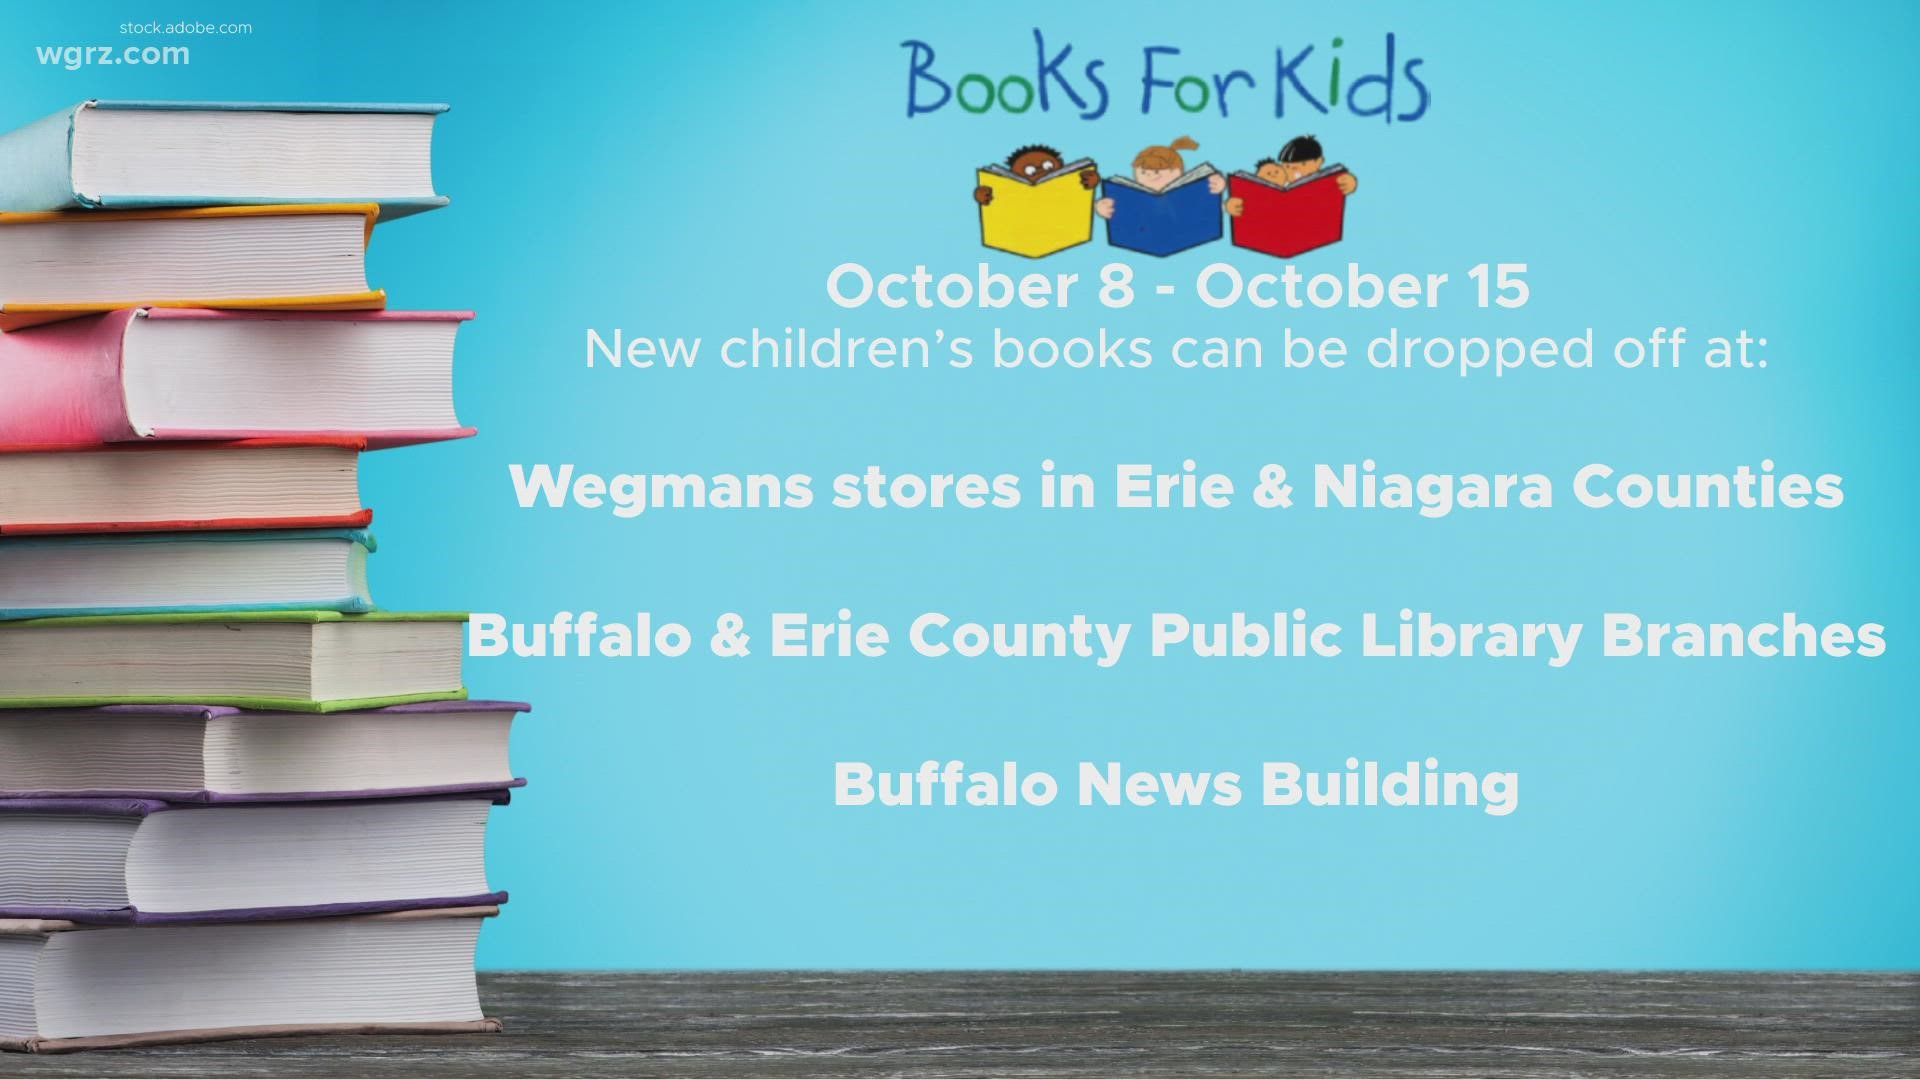 Over the last 26 years nearly 3 million books have been donated to local kids in need.